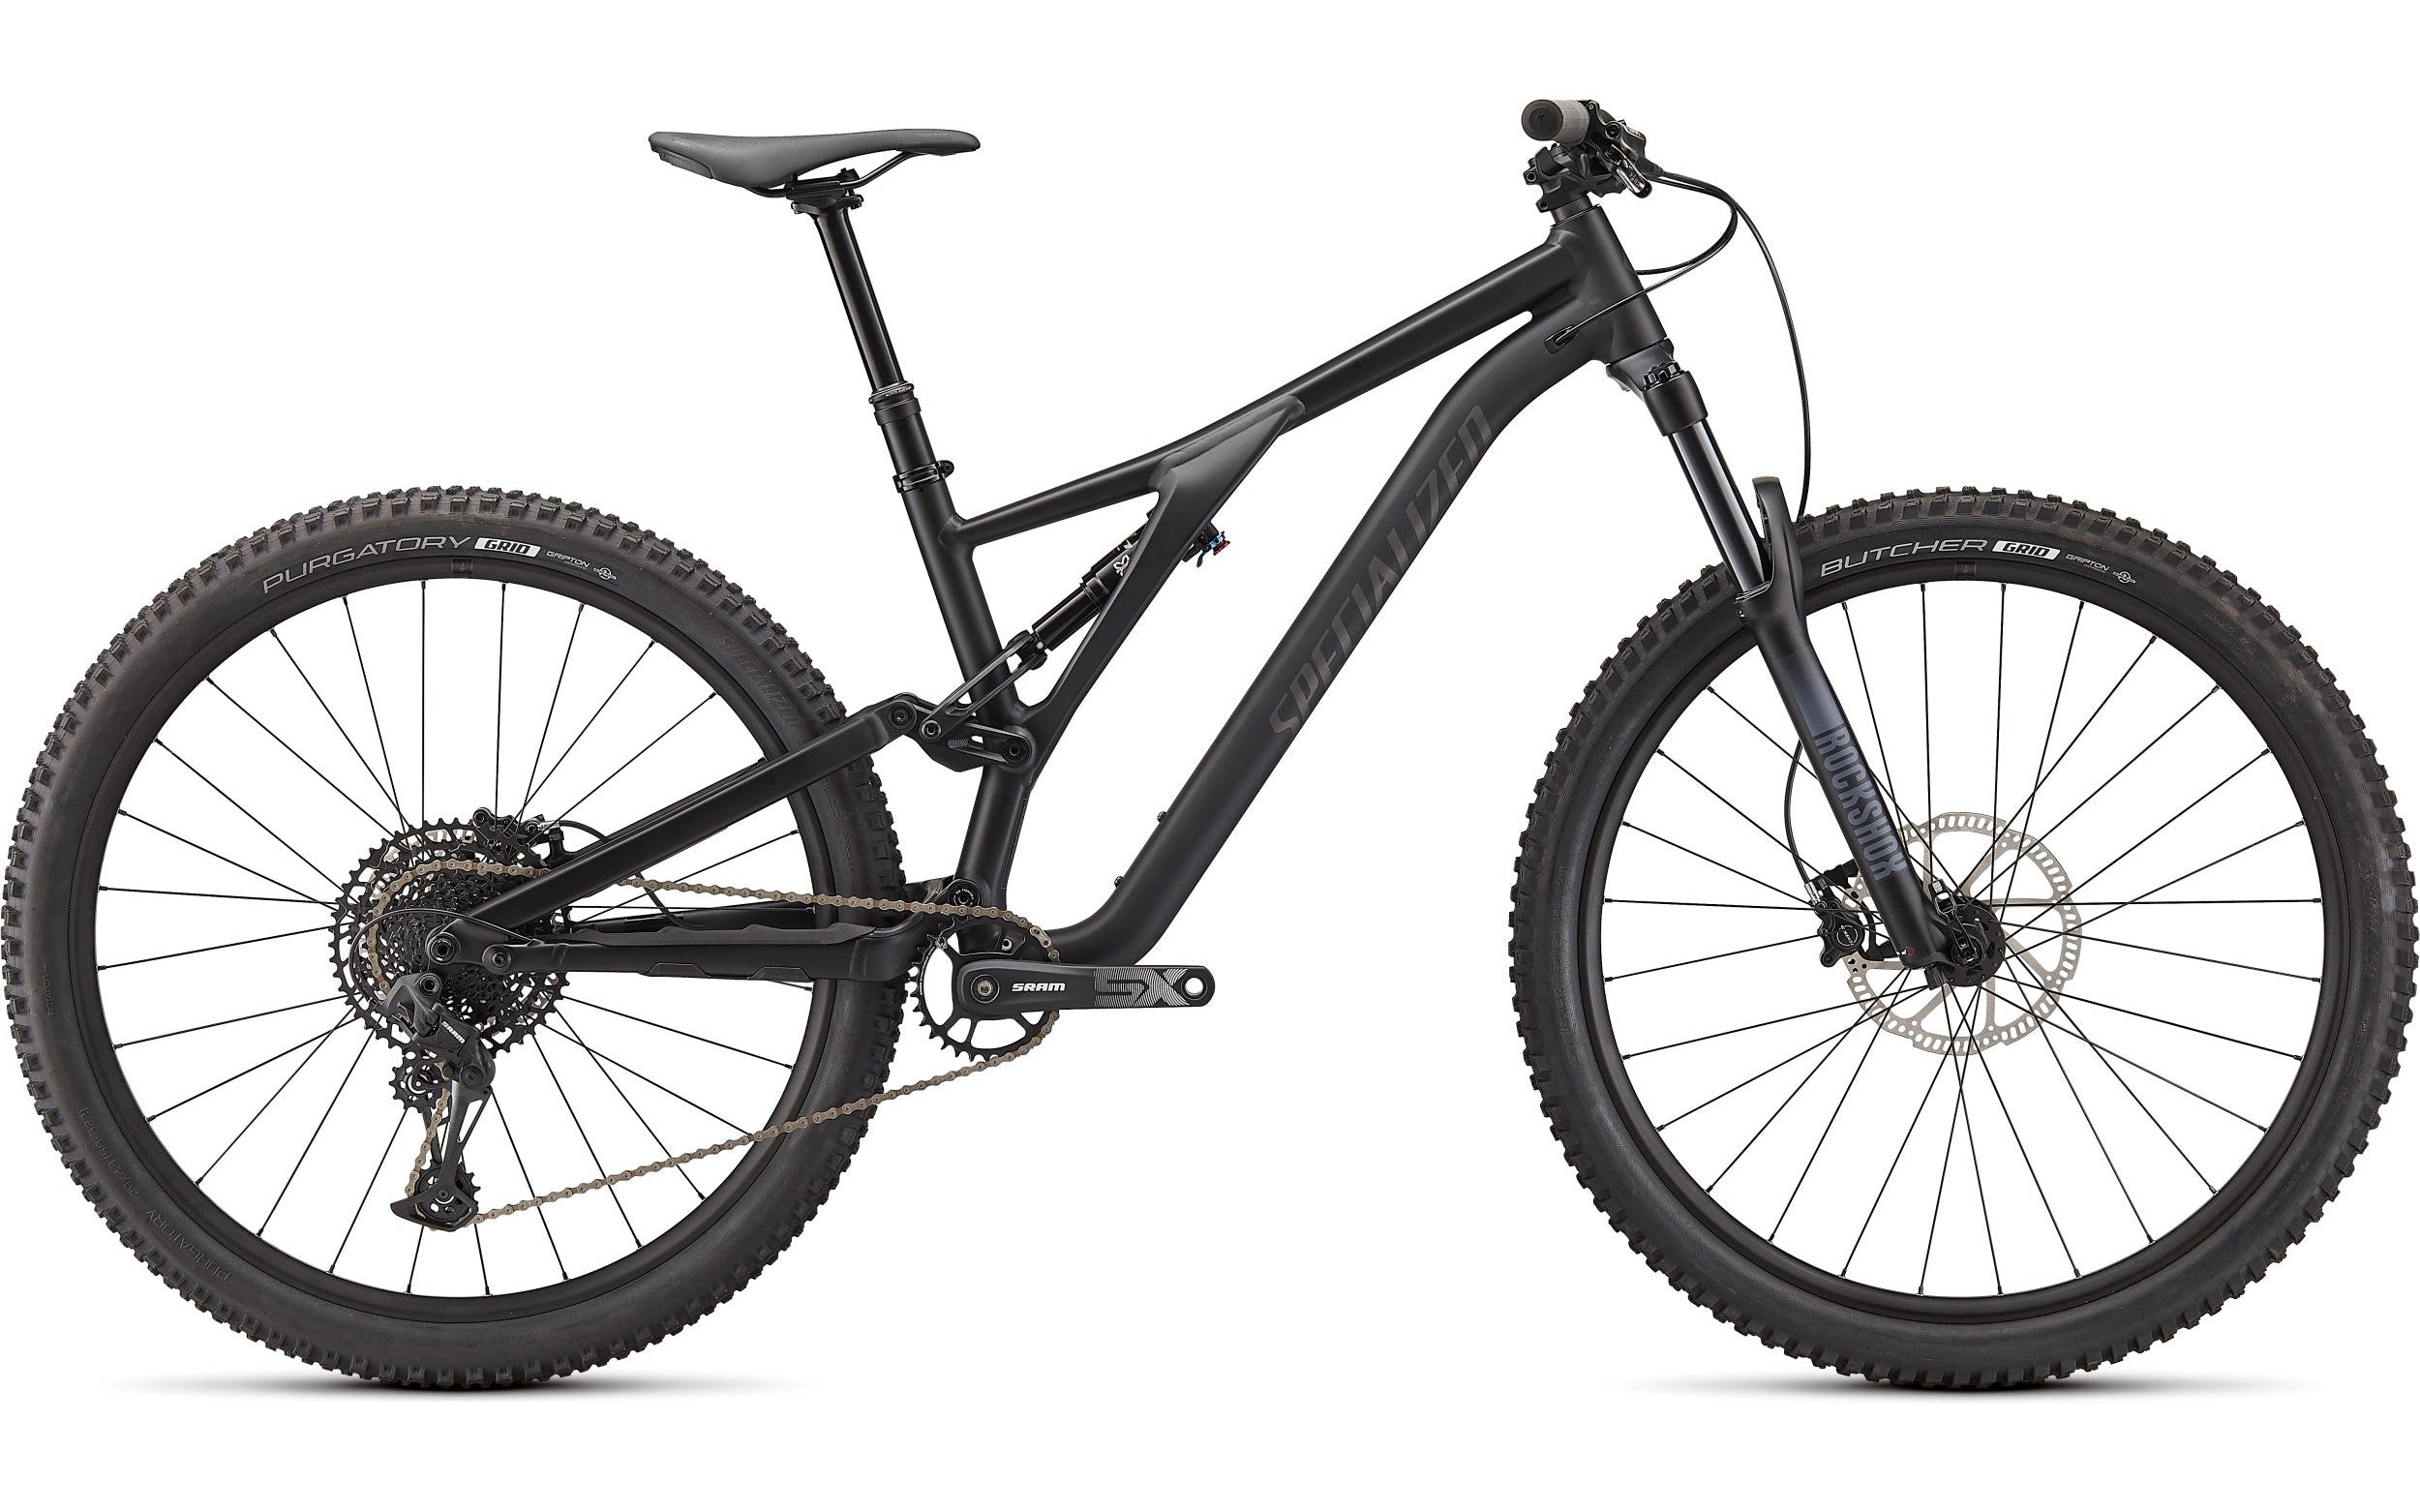 SPECIALIZED Stumpjumper ST Alloy 2019モデル 柔らかな質感の 